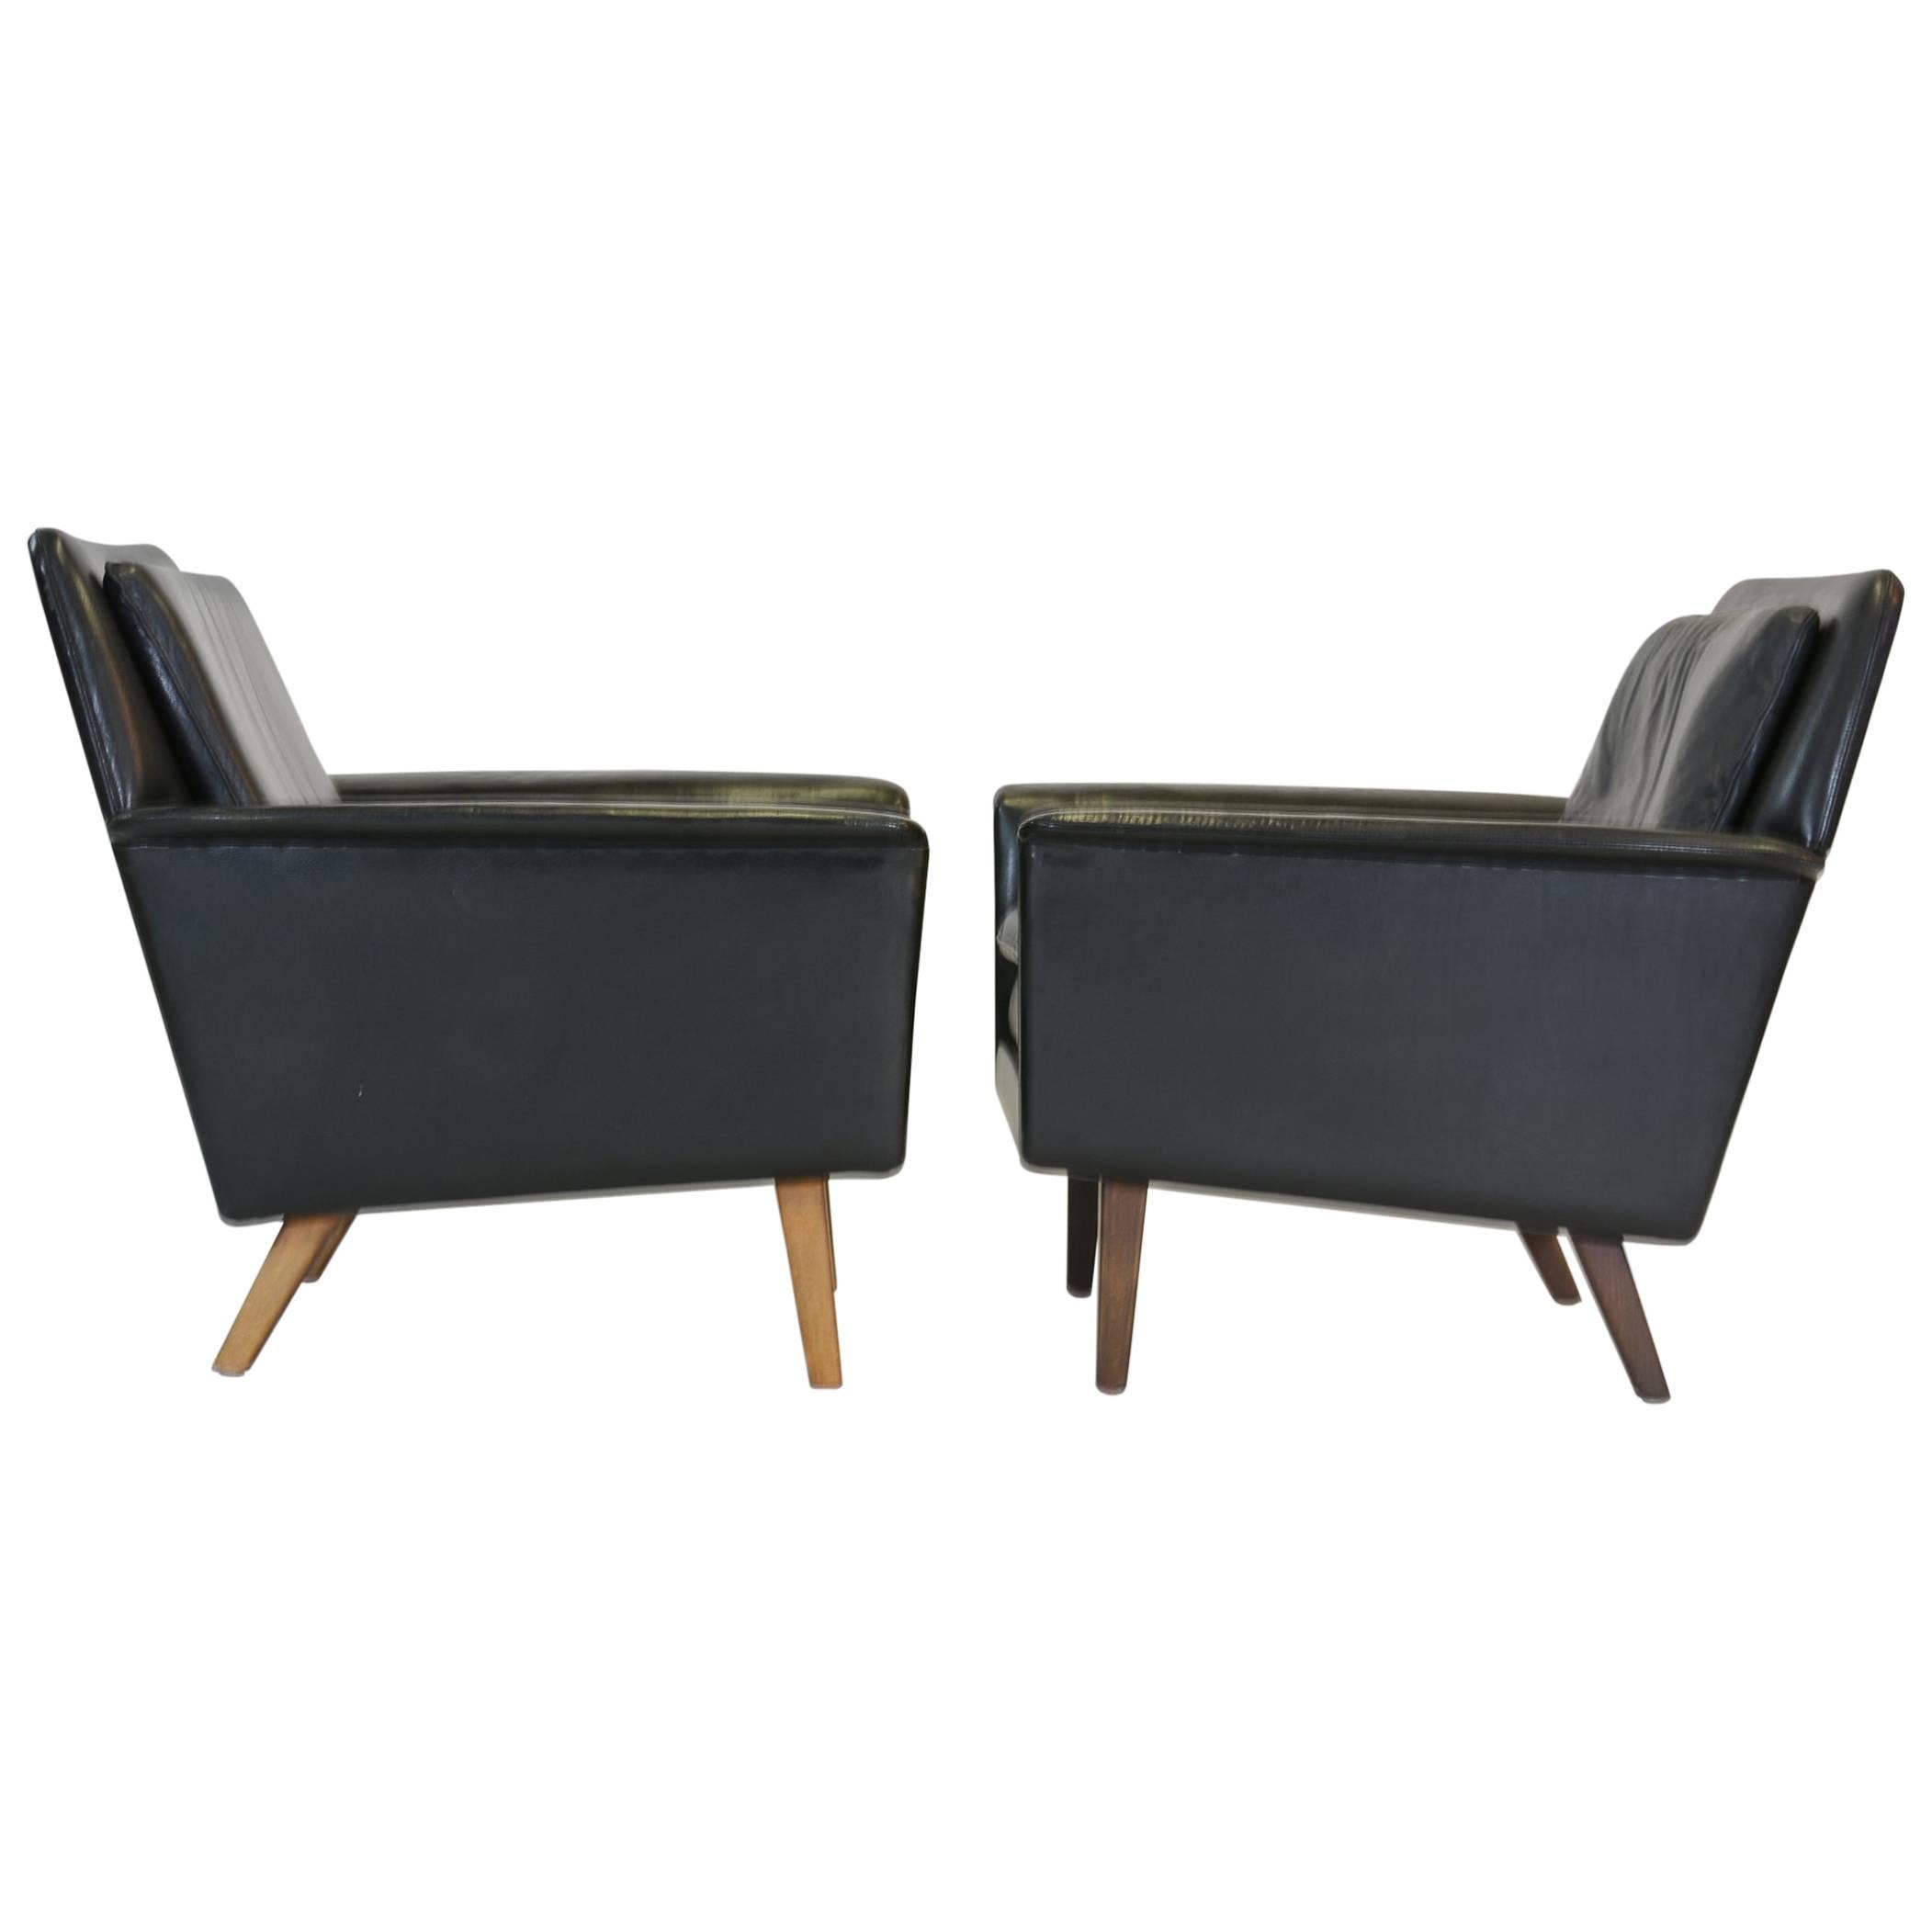 Pair of "Lyon" Club Chairs by Alf Svensson for Fritz Hansen in Black Leather